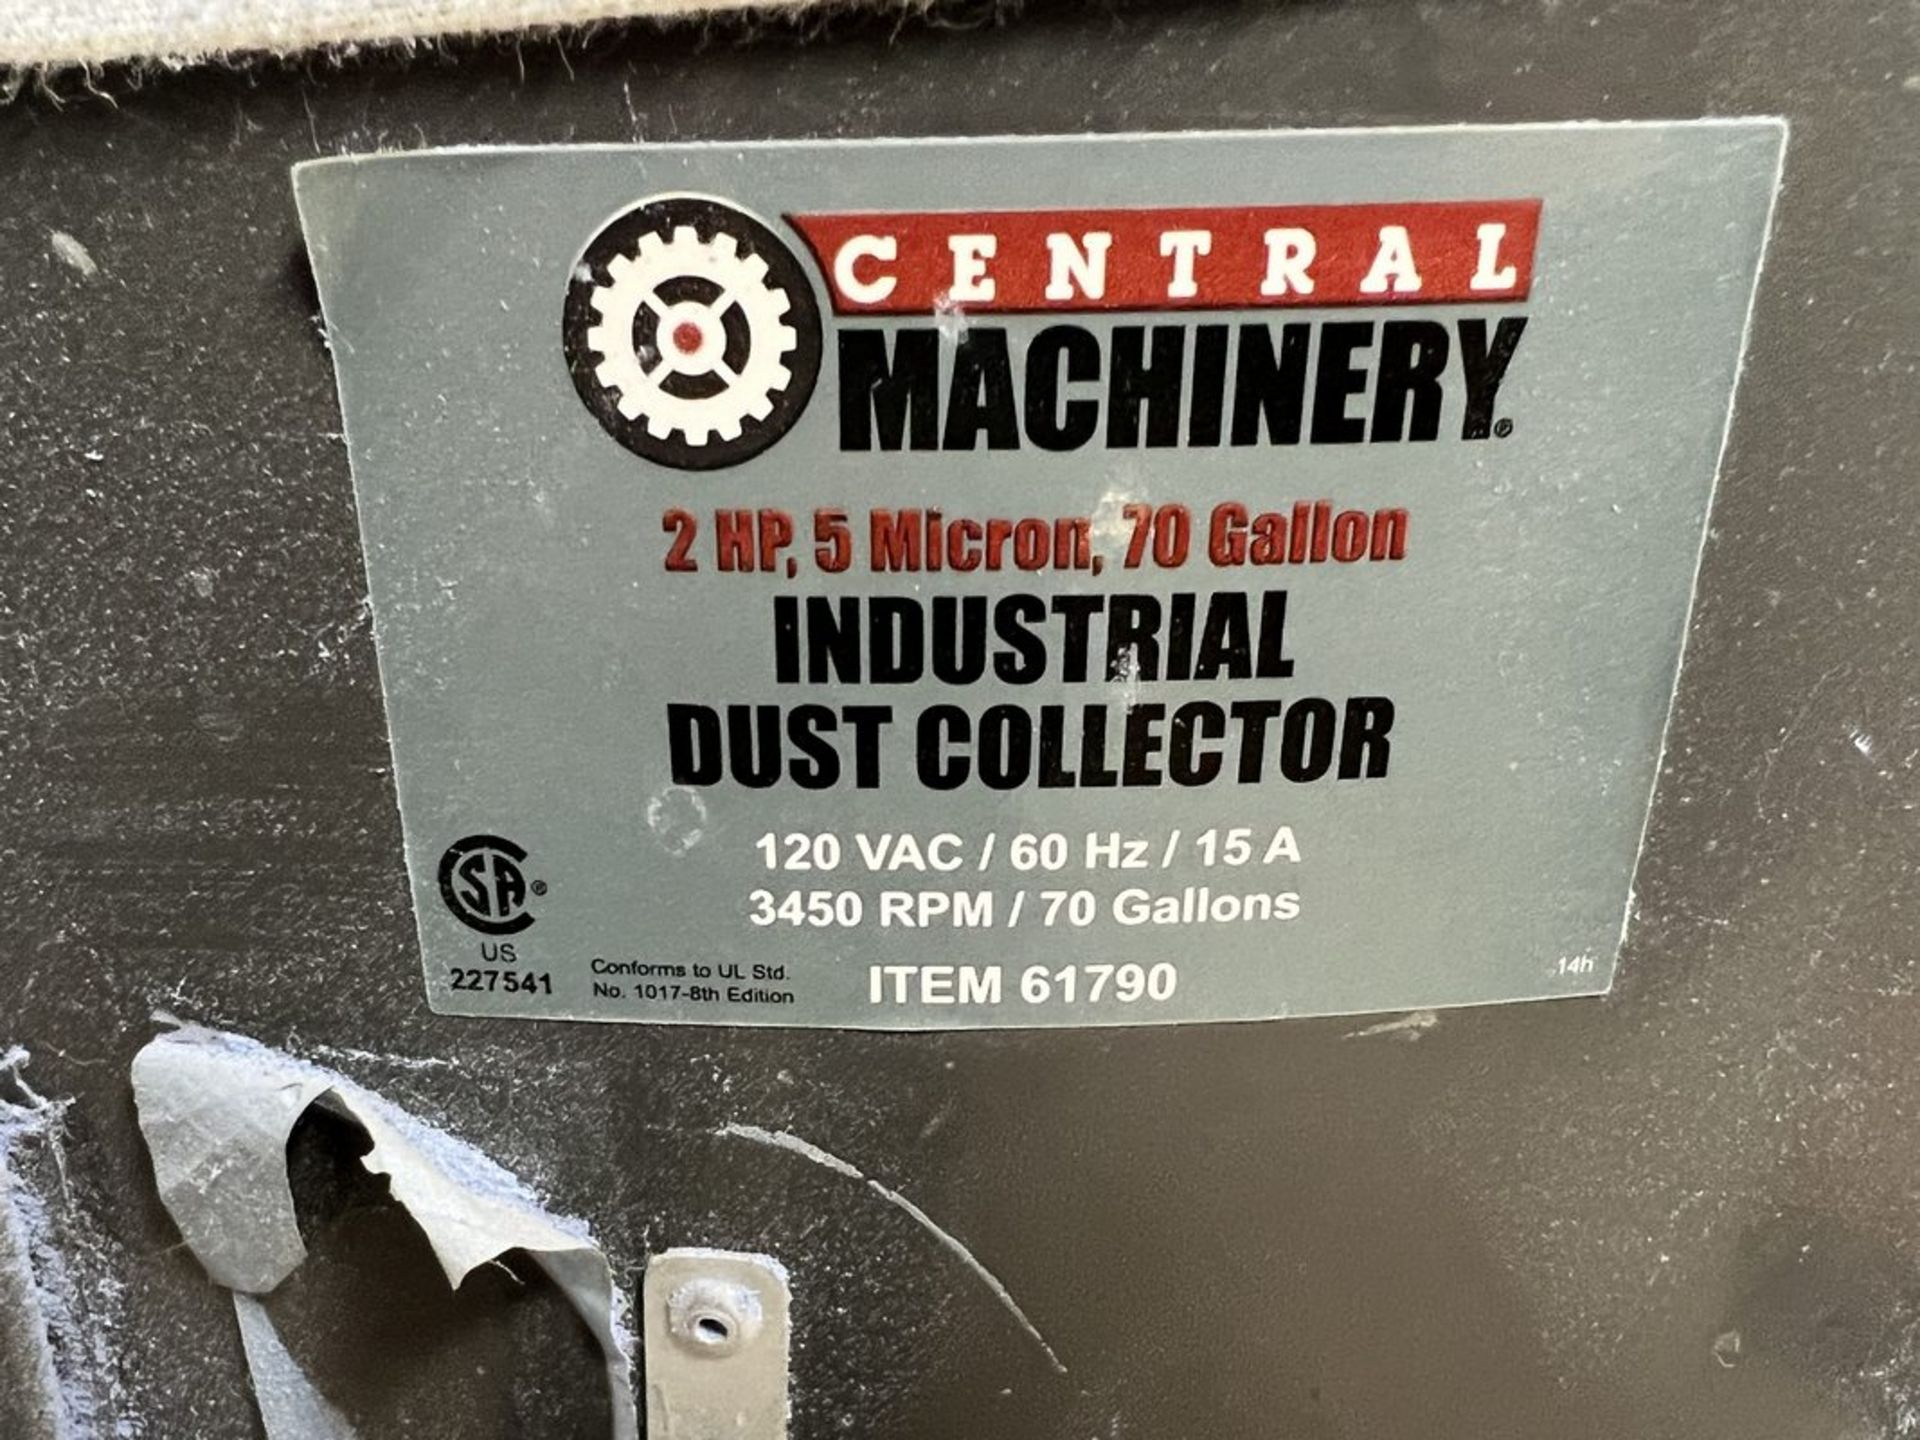 Central Machinery Dust Collector - Image 3 of 3